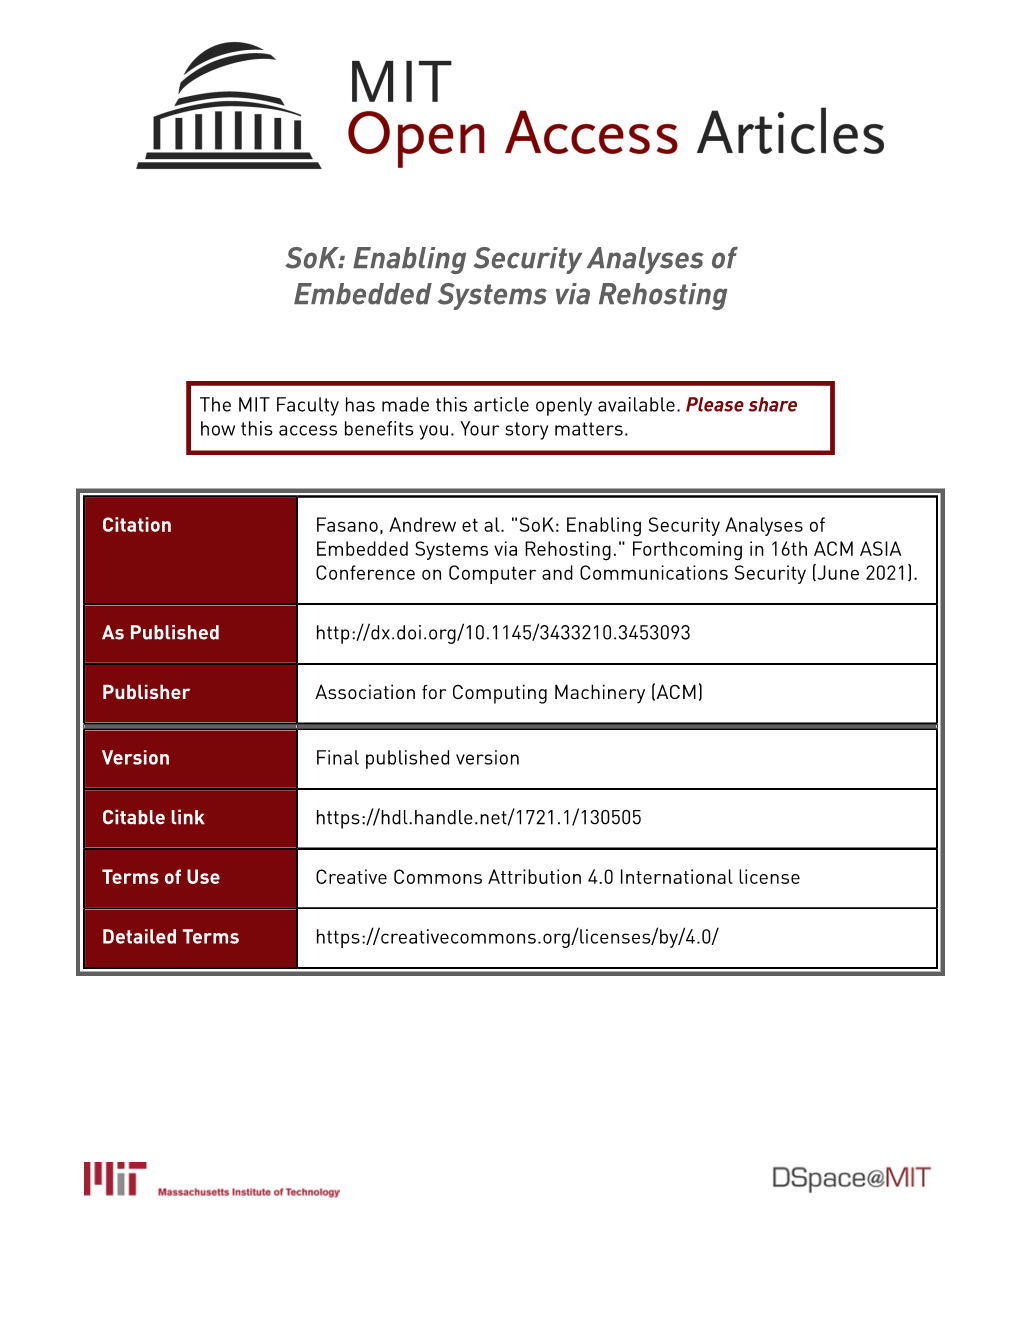 Enabling Security Analyses of Embedded Systems Via Rehosting